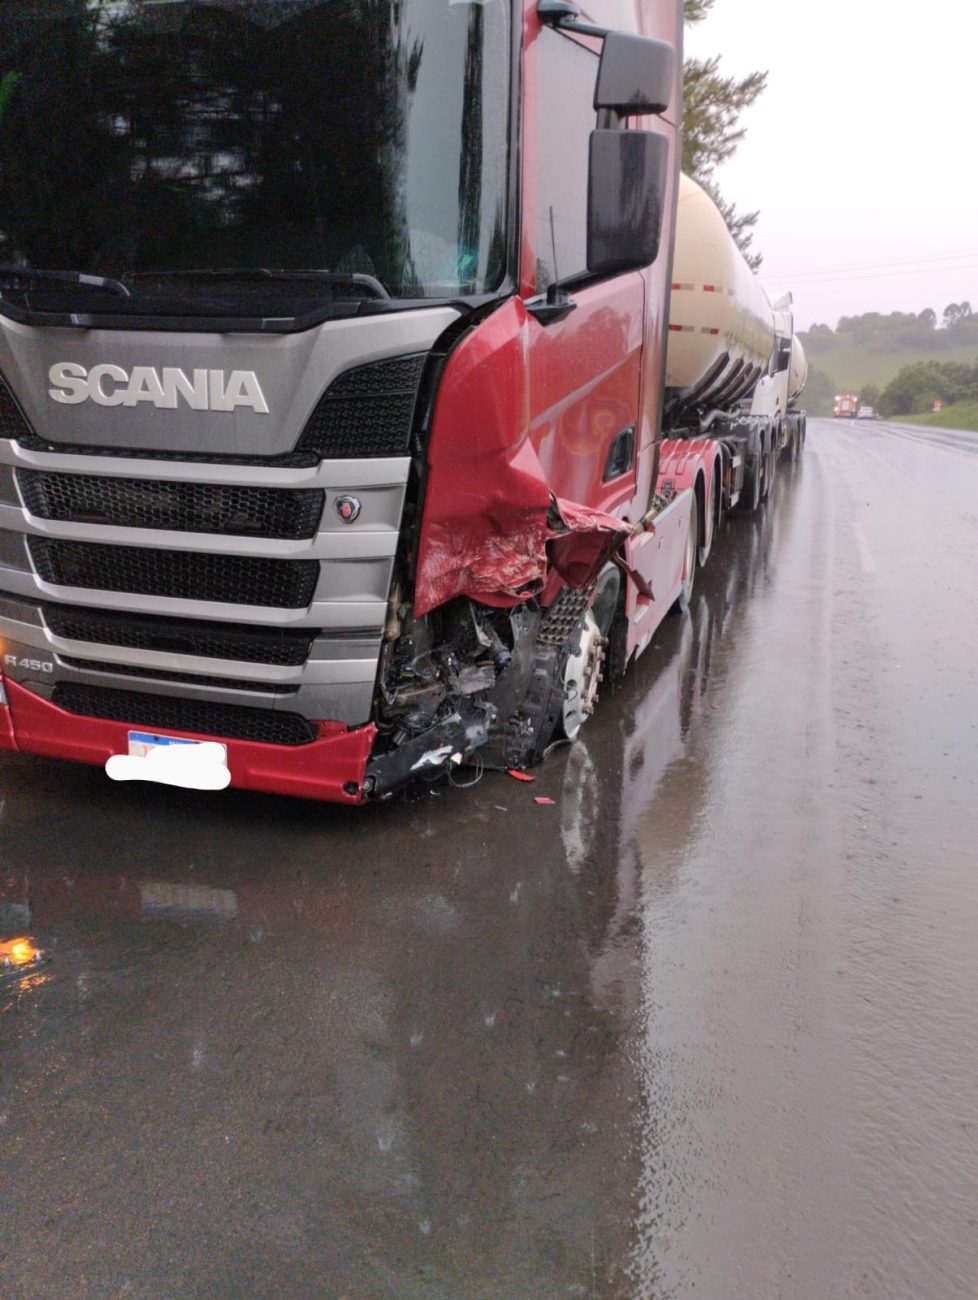 The truck driver was not injured - Social networks/Reproduction/ND